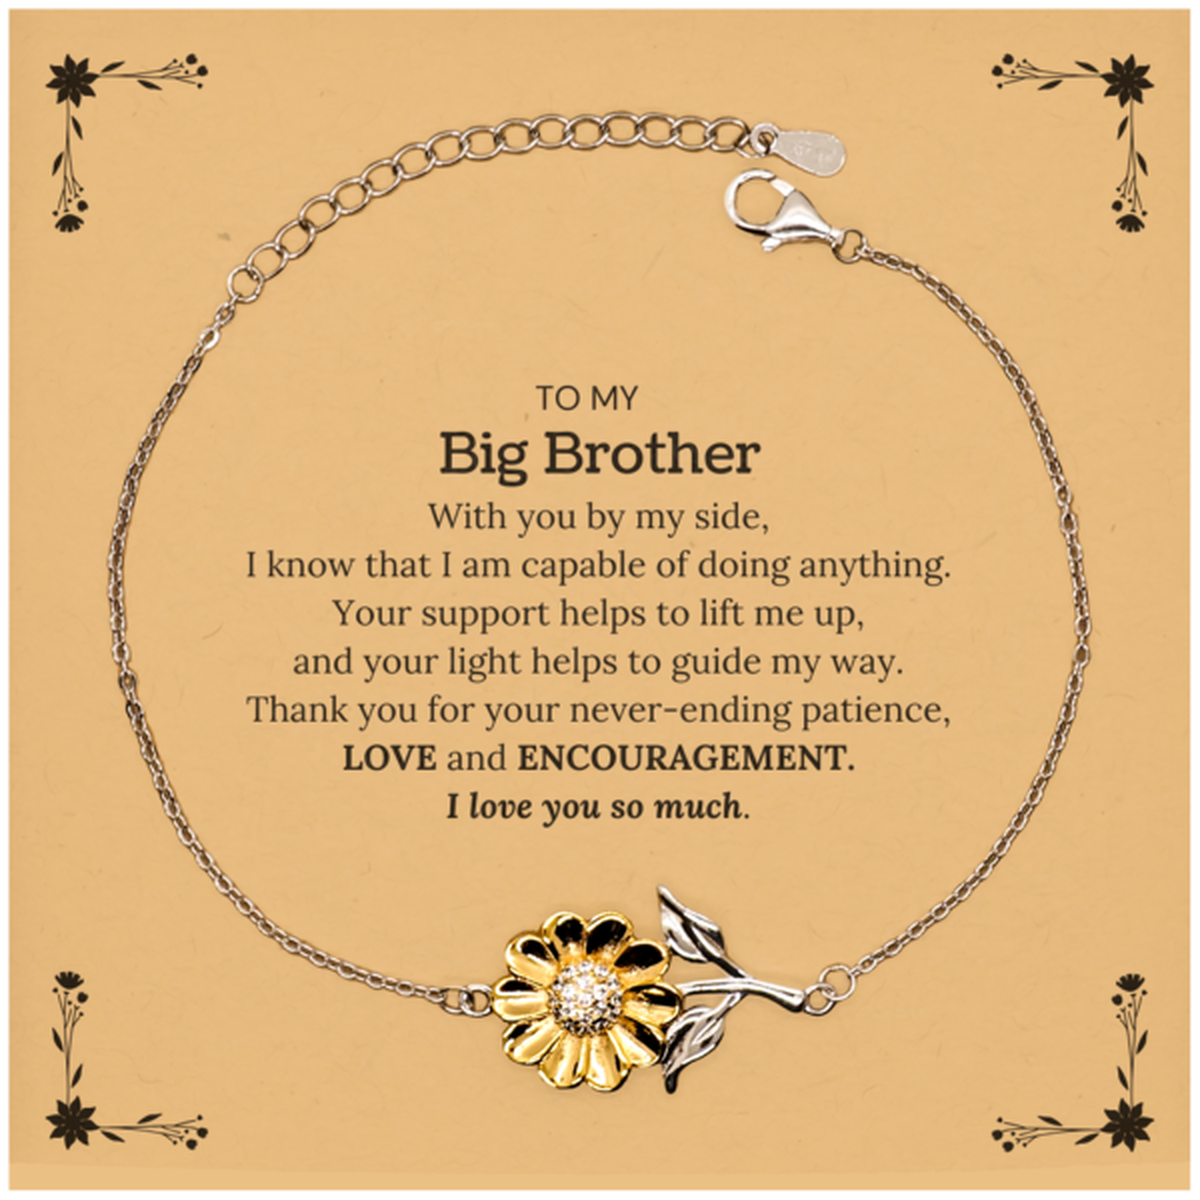 Appreciation Big Brother Sunflower Bracelet Gifts, To My Big Brother Birthday Christmas Wedding Keepsake Gifts for Big Brother With you by my side, I know that I am capable of doing anything. I love you so much